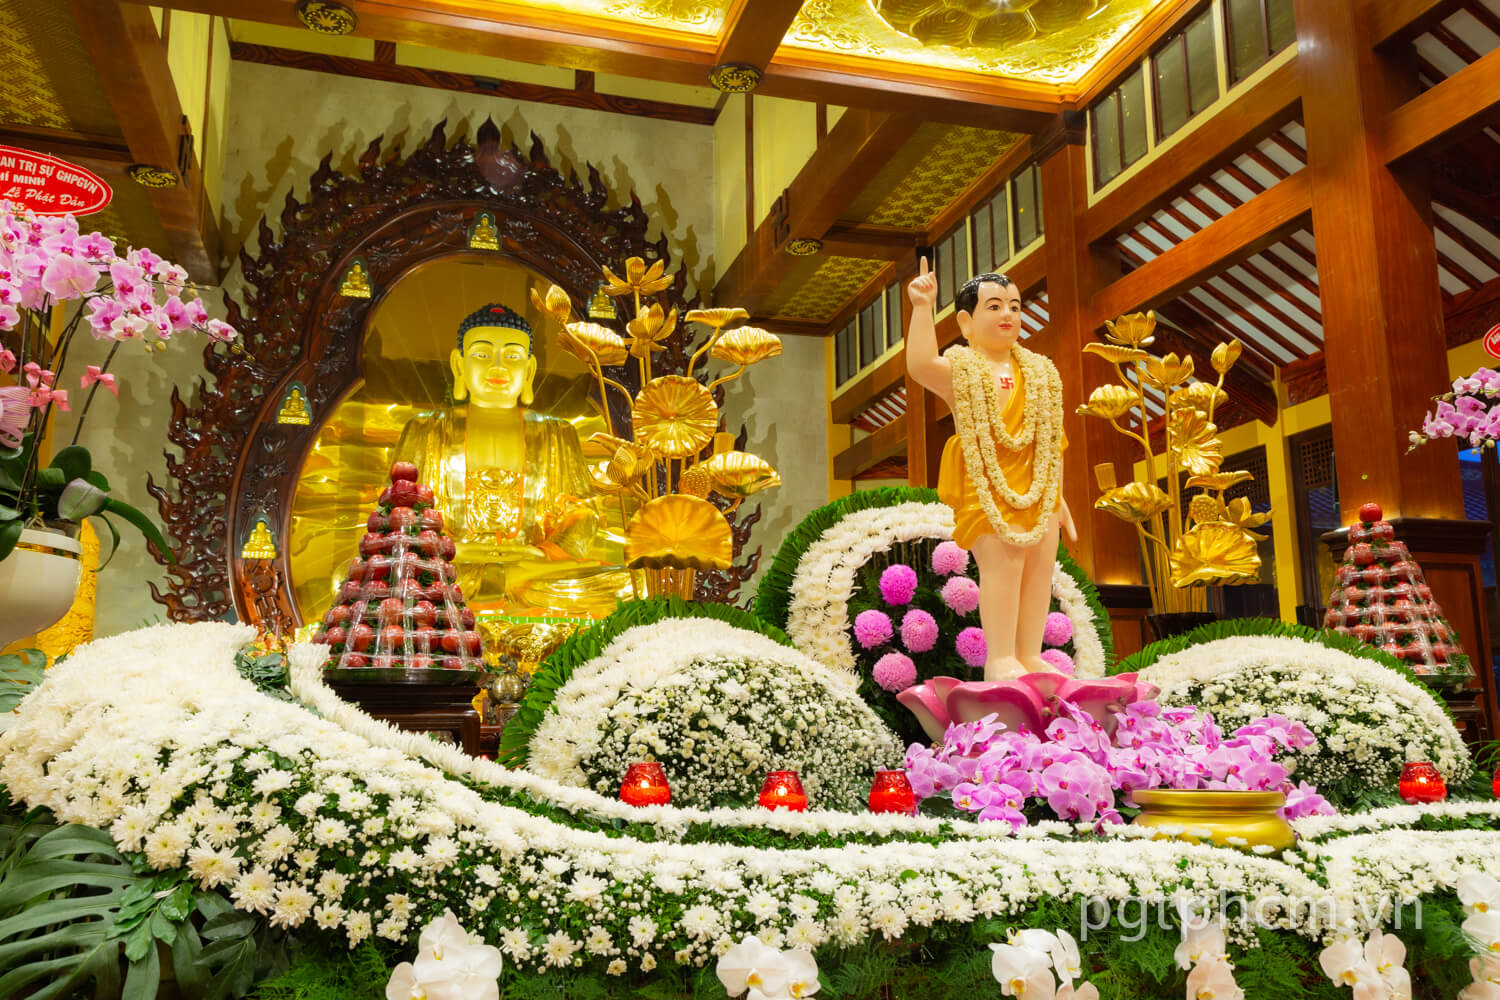 Every year on the day of the full moon in May, people celebrate Buddha's birthday. 